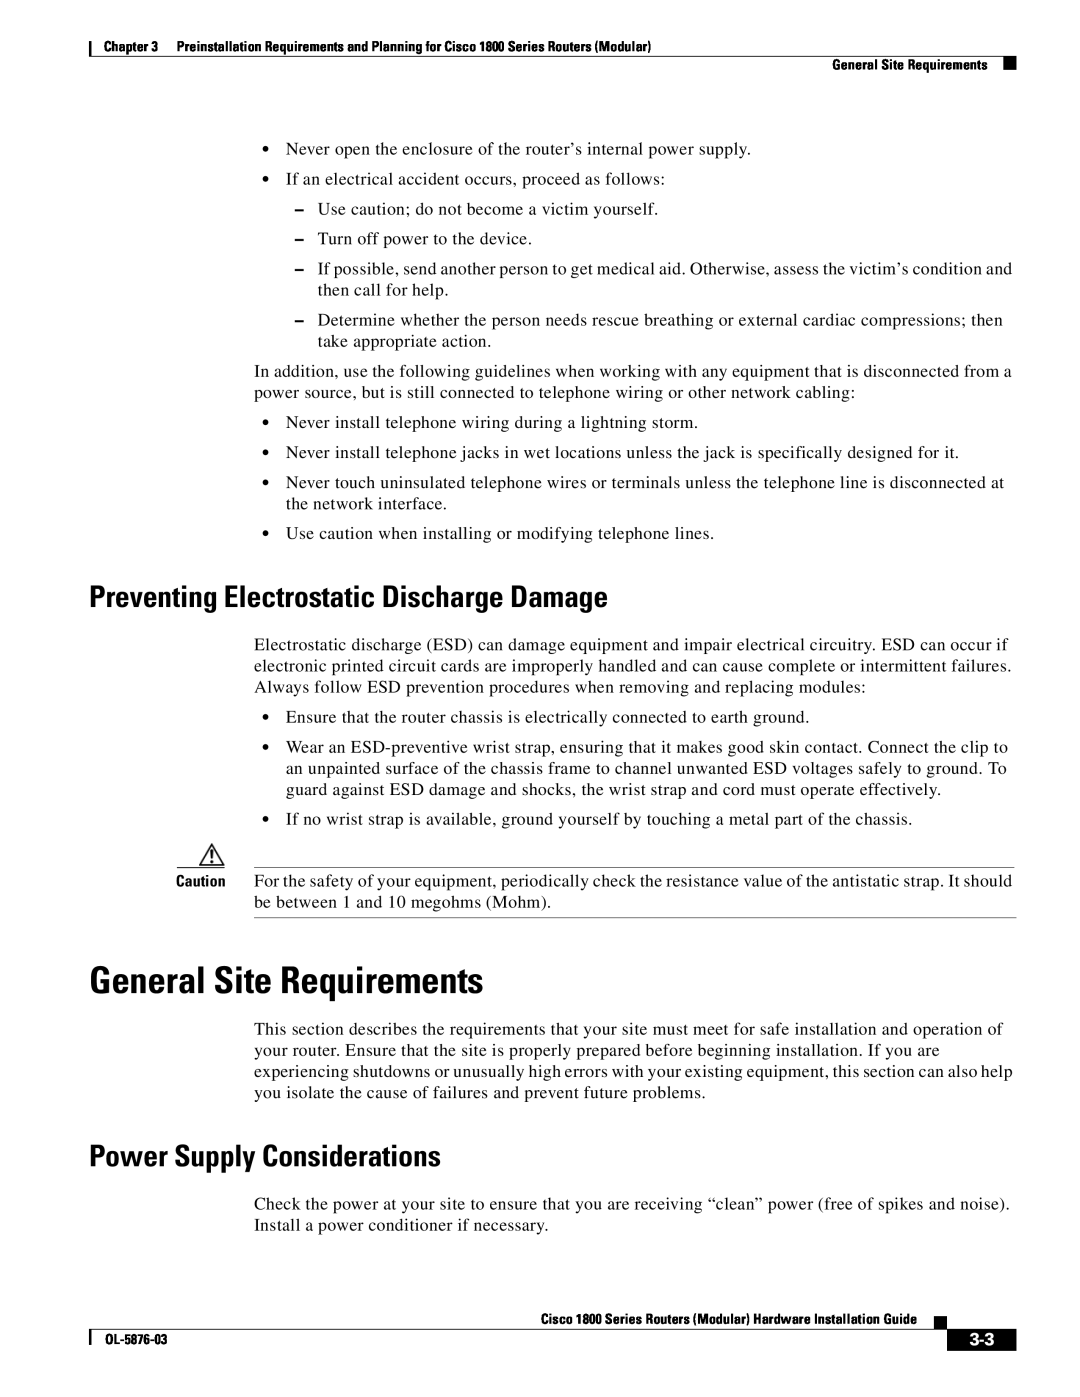 Cisco Systems CISCO1841-HSEC/K9-RF manual General Site Requirements, Preventing Electrostatic Discharge Damage 